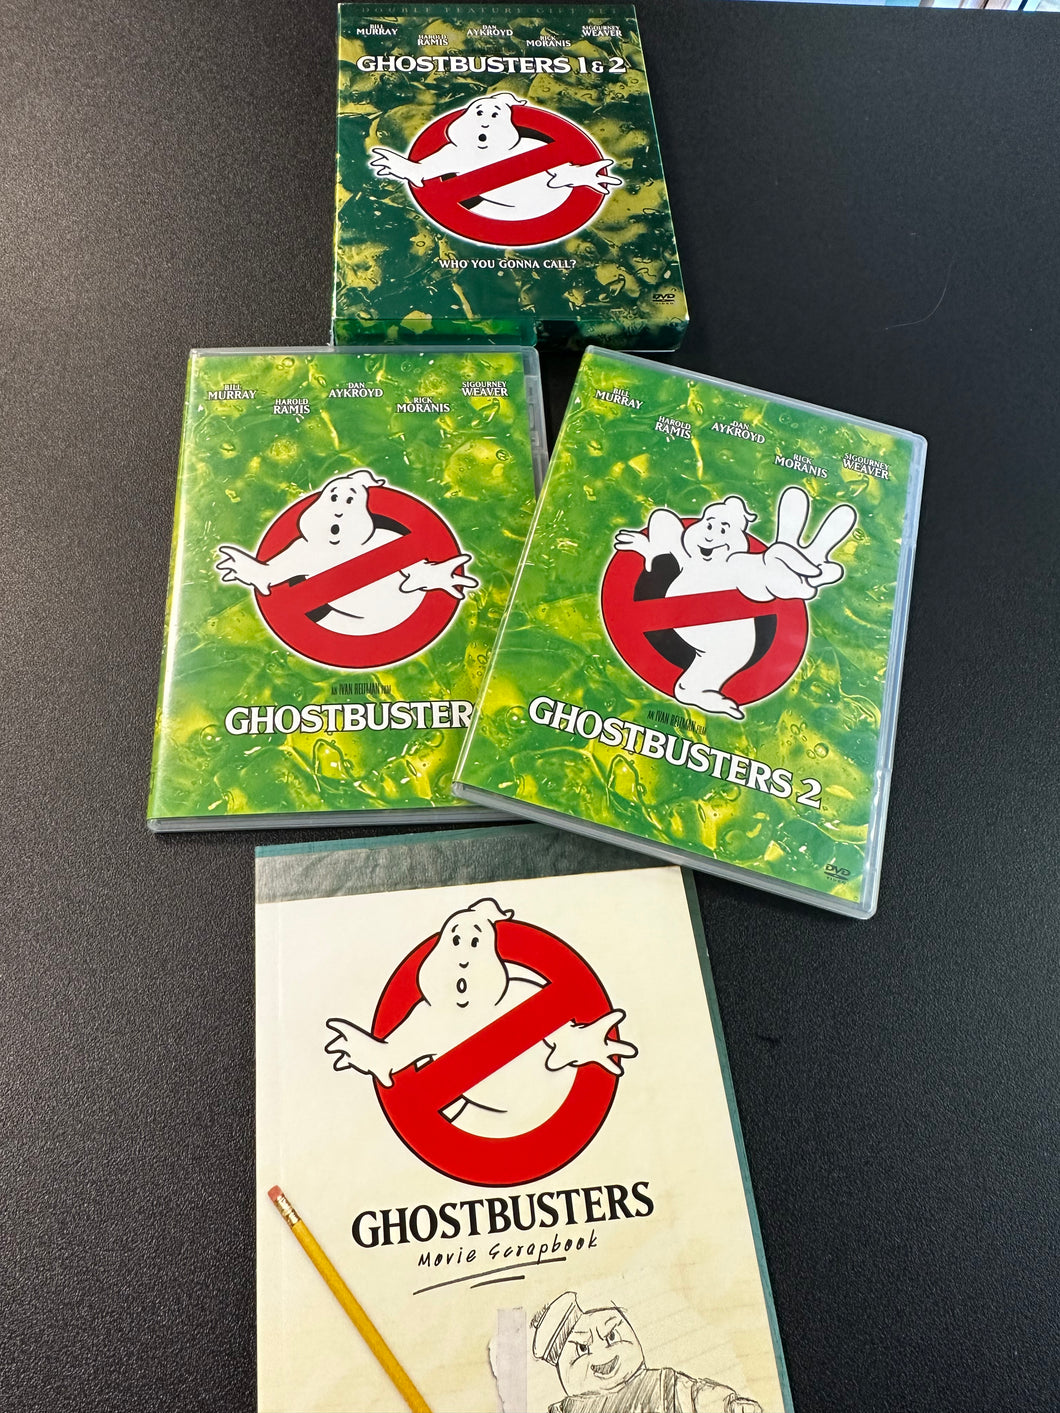 Ghostbusters 1 & 2 Double Feature Gift Set with Scrapbook [DVD] Preowned